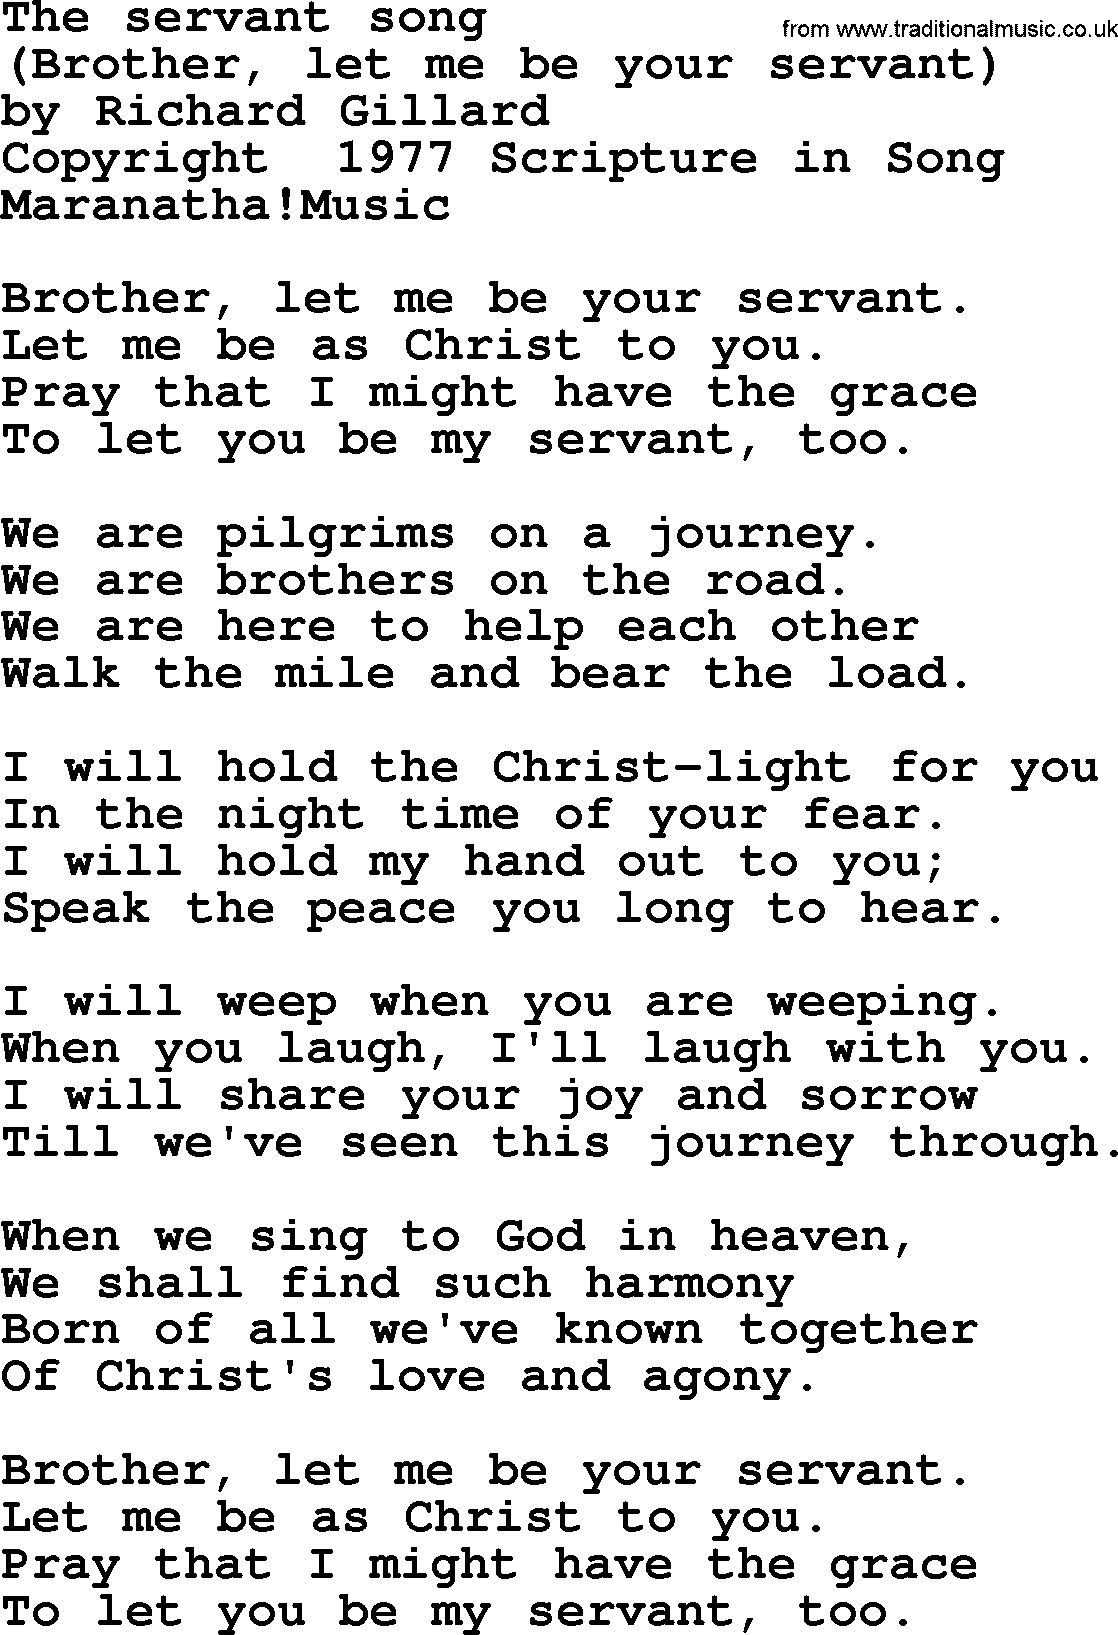 A collection of 500+ most sung Christian church hymns and songs, title: Brother, Let Me Be Your Servant(The Servant Song)~, lyrics, PPTX and PDF